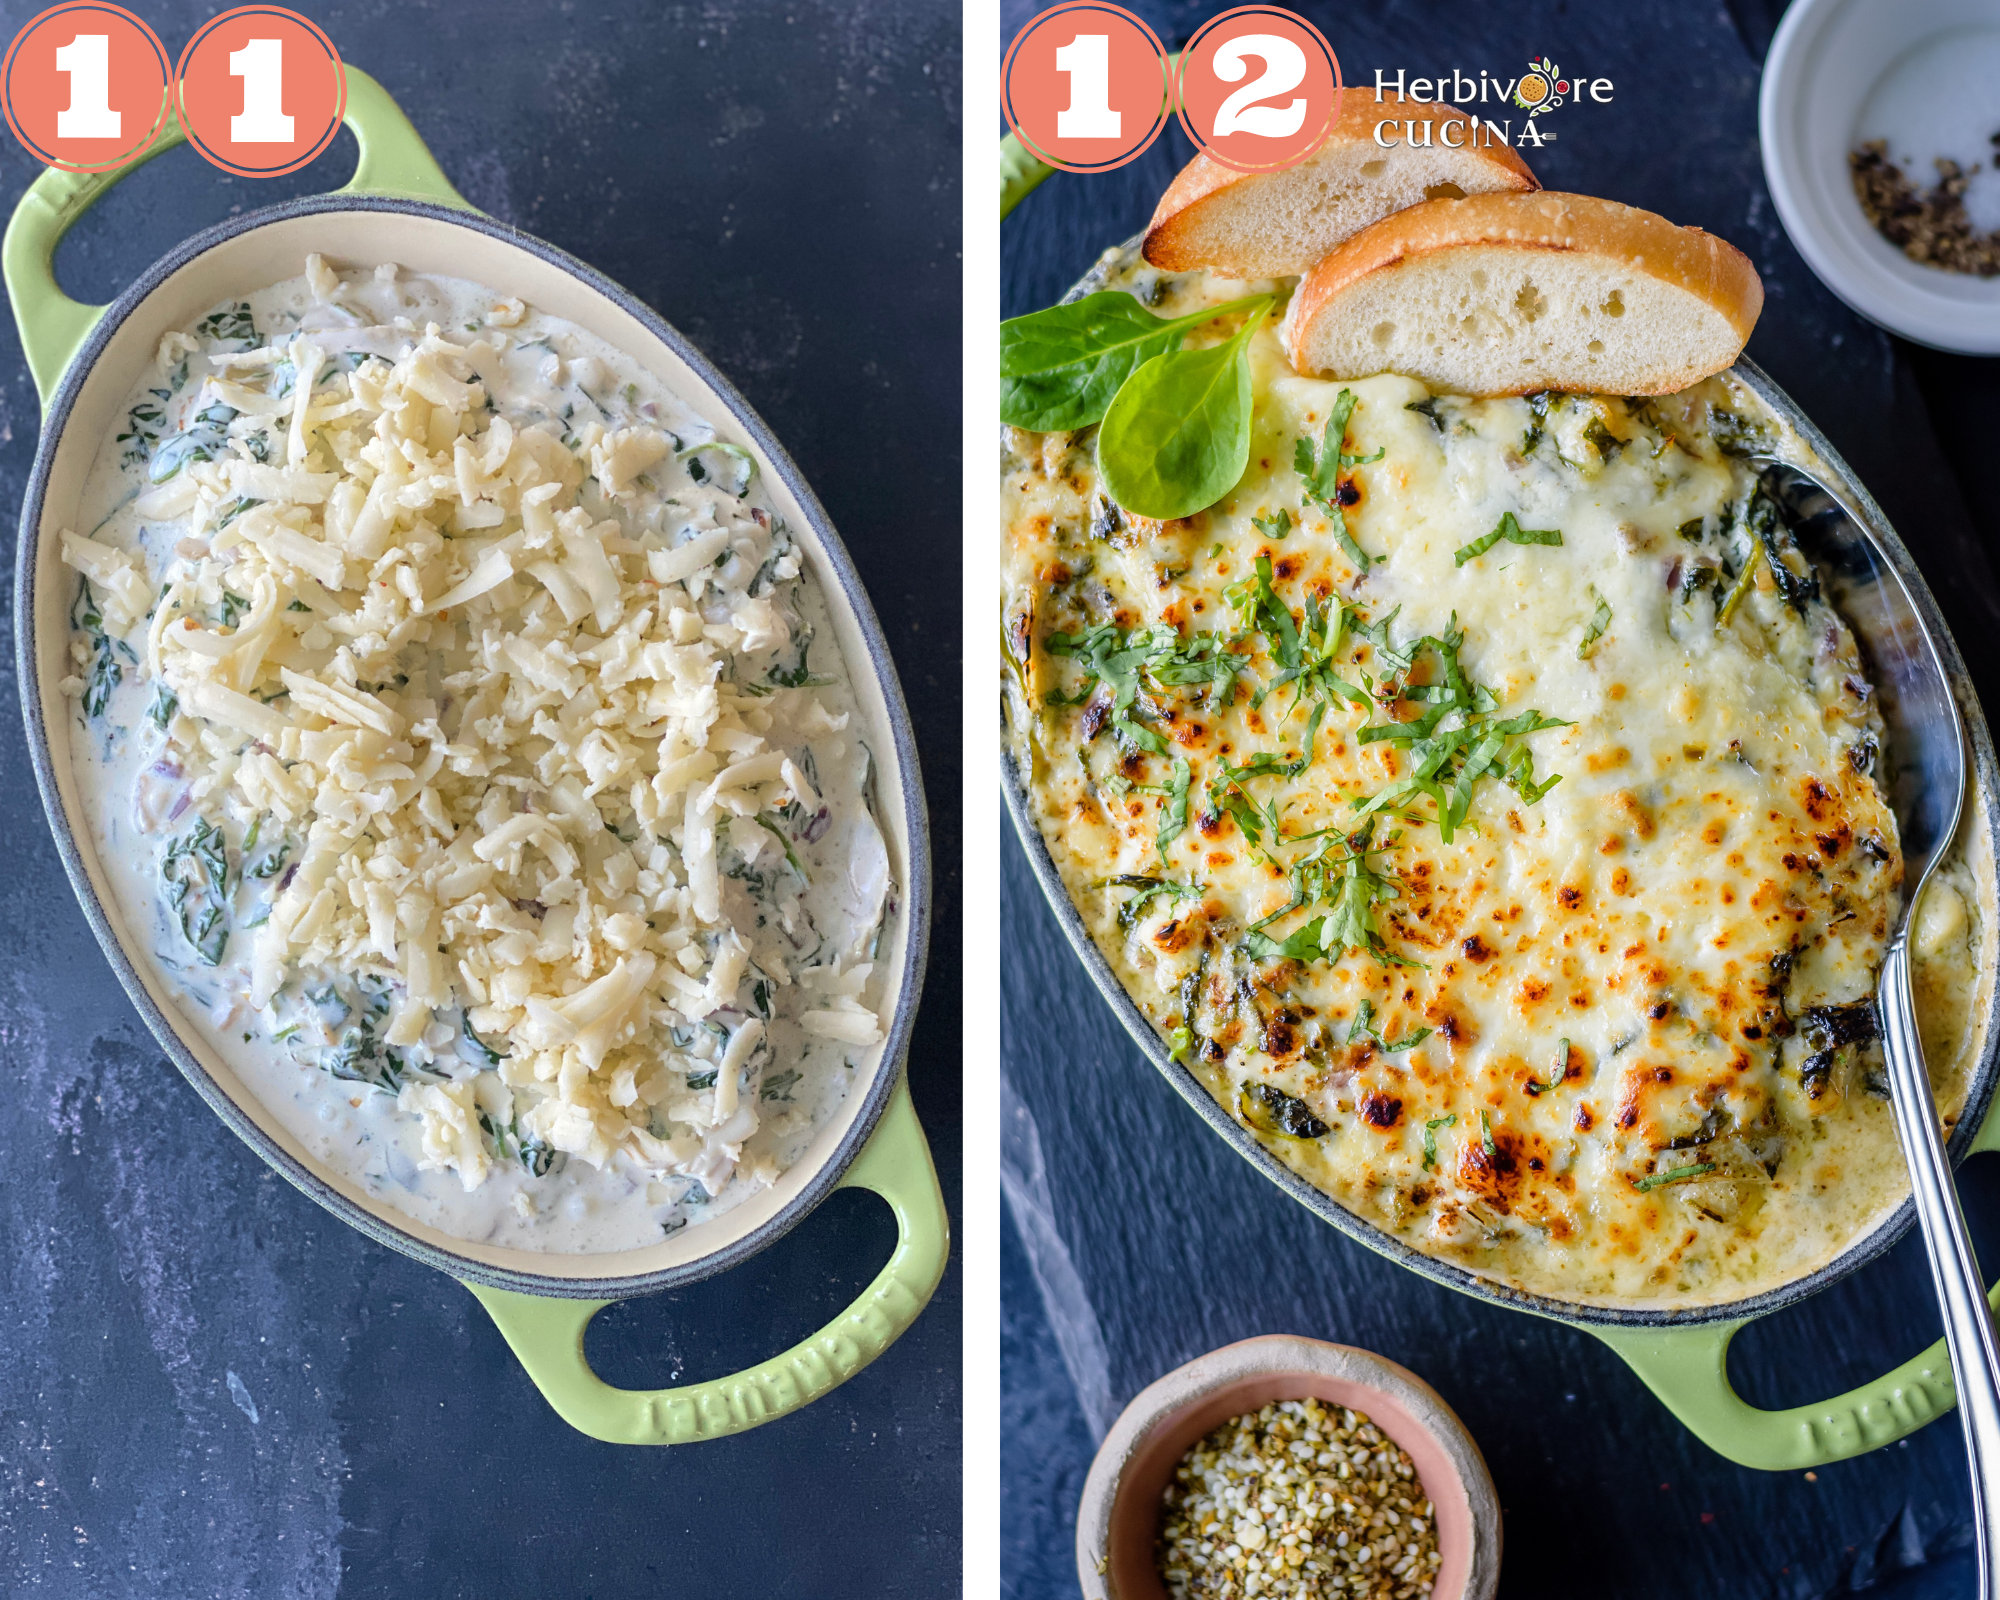 Steps to make baked spinach artichoke dip in the oven. 